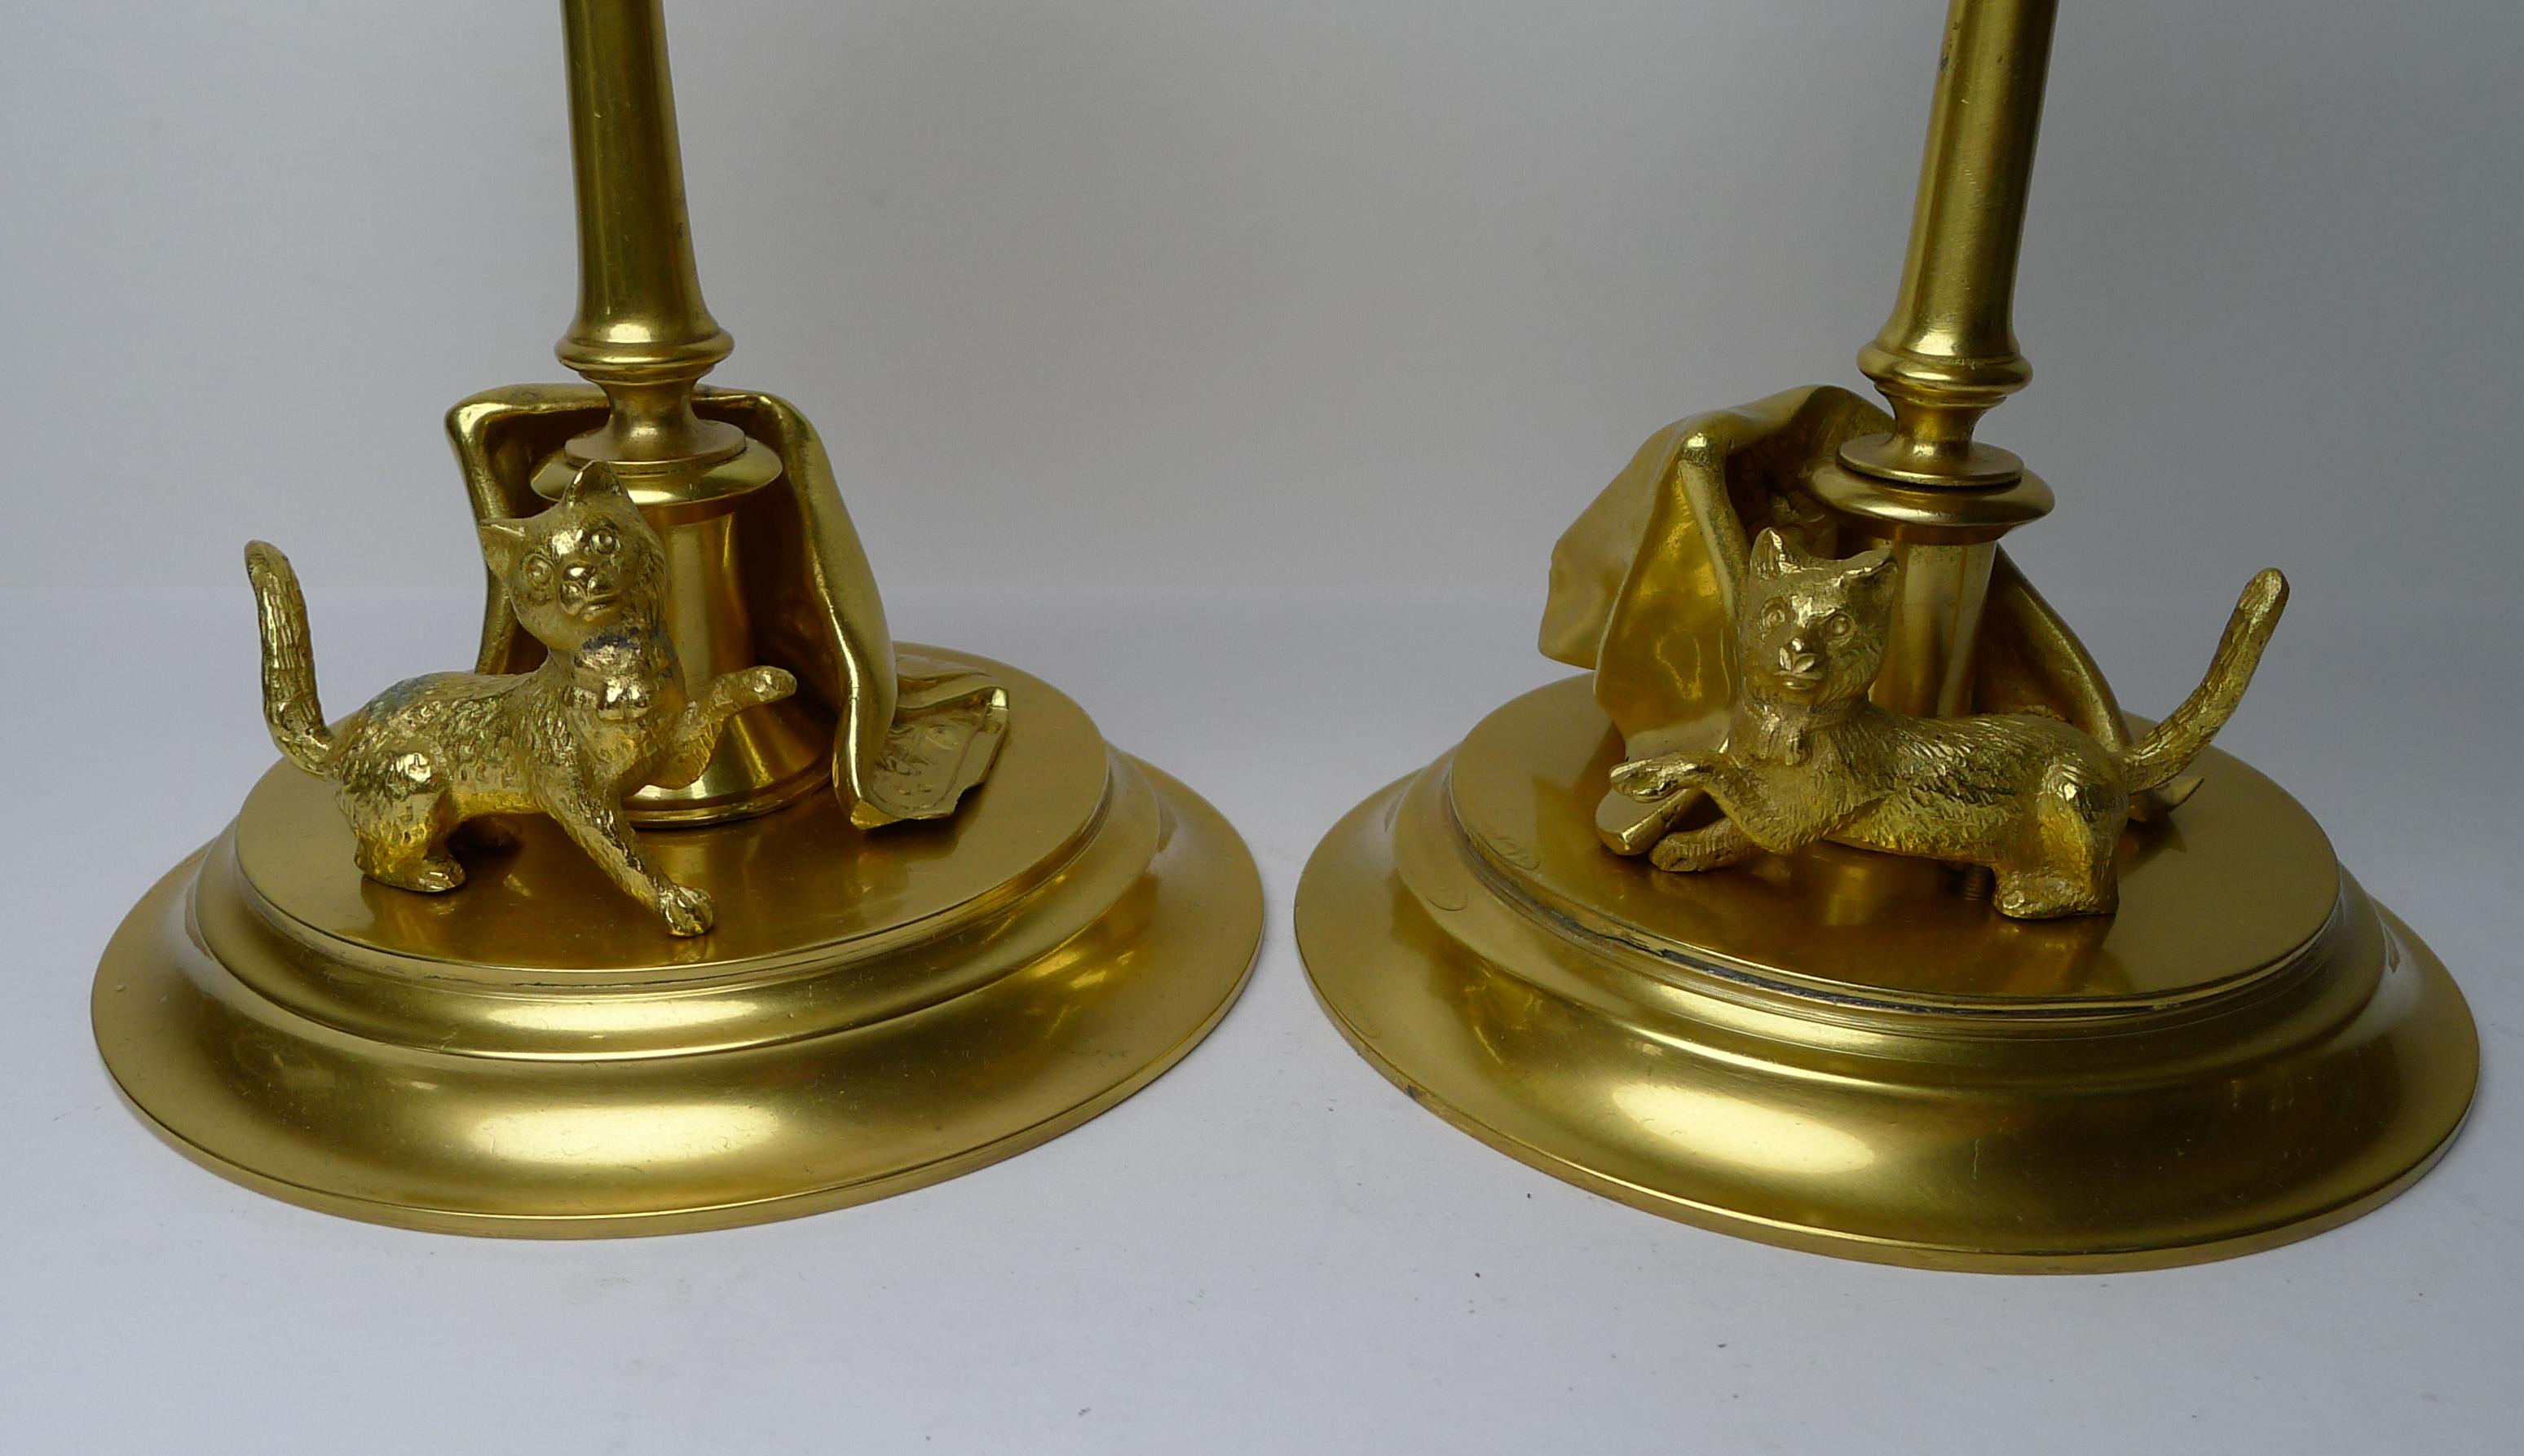 Gilt Playing Cats or Kittens, Gilded Bronze Desk Set, c.1890 For Sale